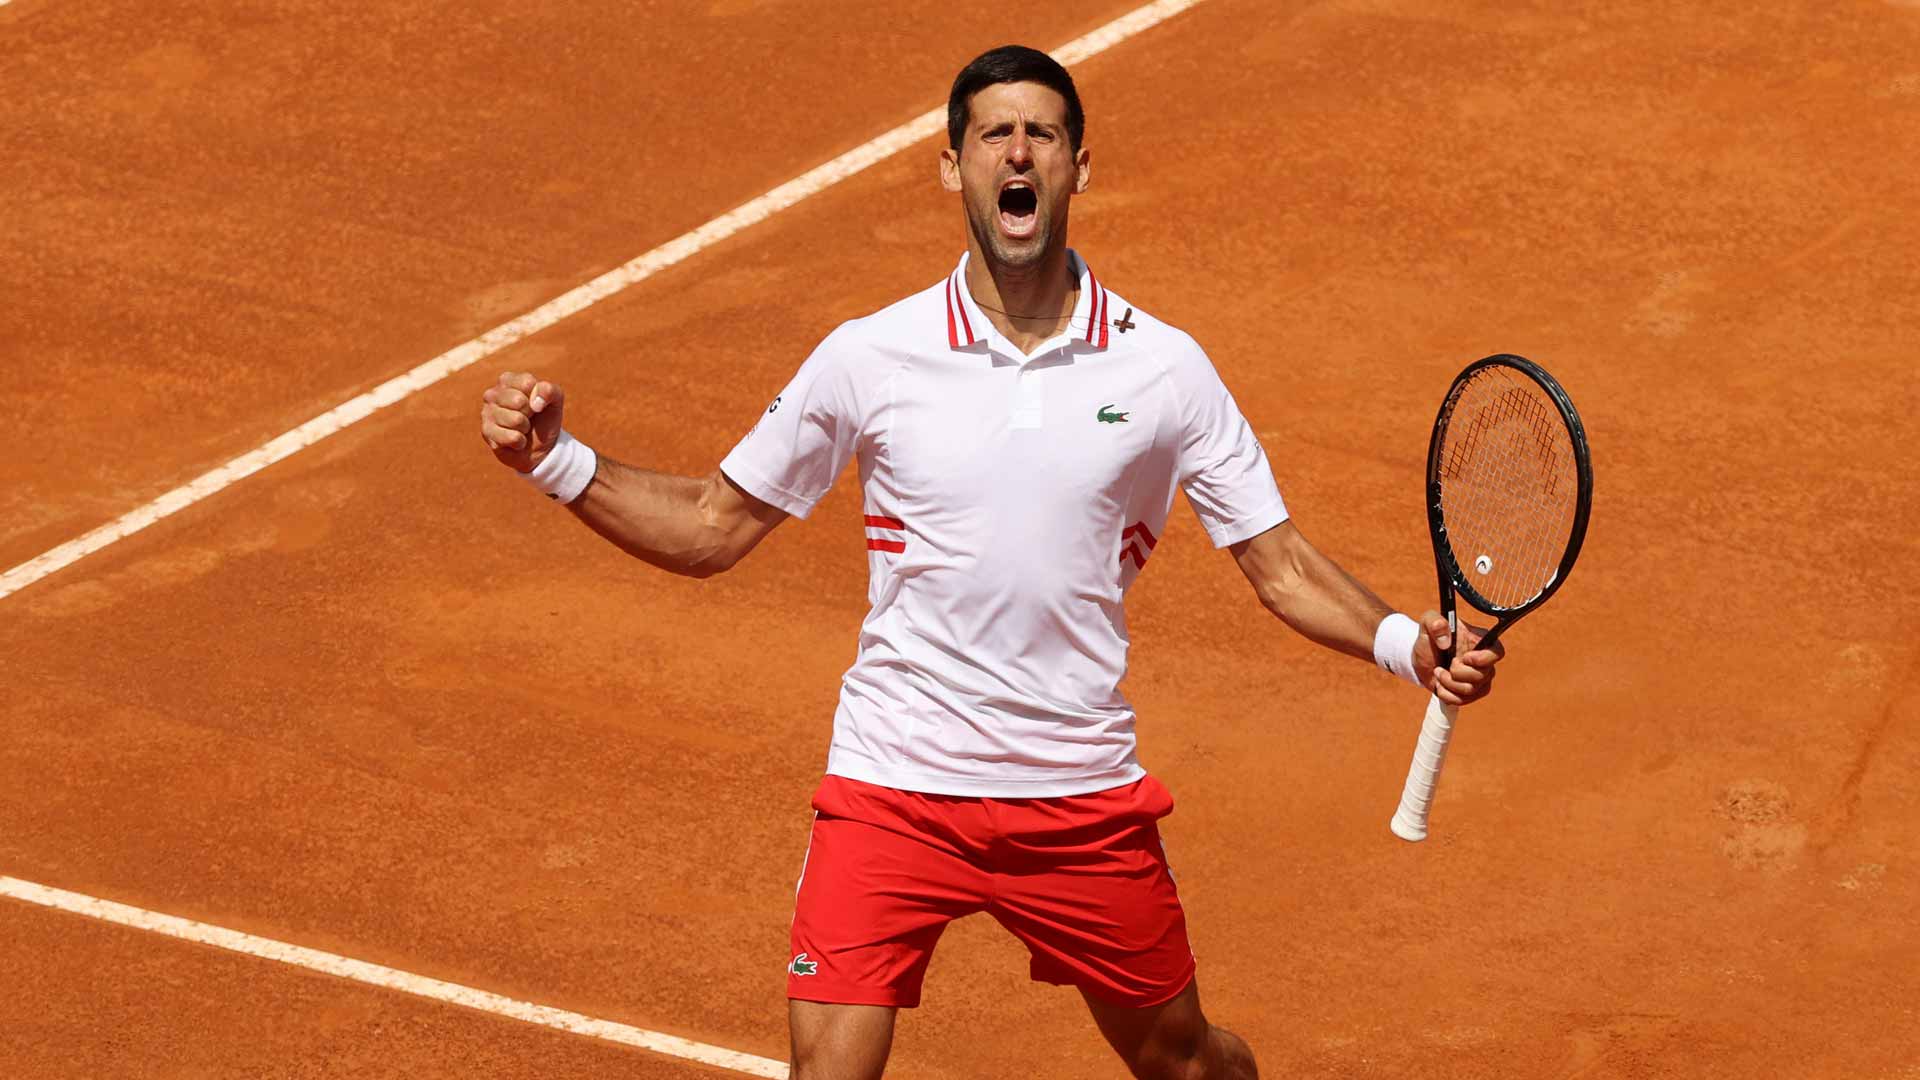 Novak Djokovic rallies from a set down to defeat Stefanos Tsitsipas at the 2021 ATP Masters 1000 event in Rome.